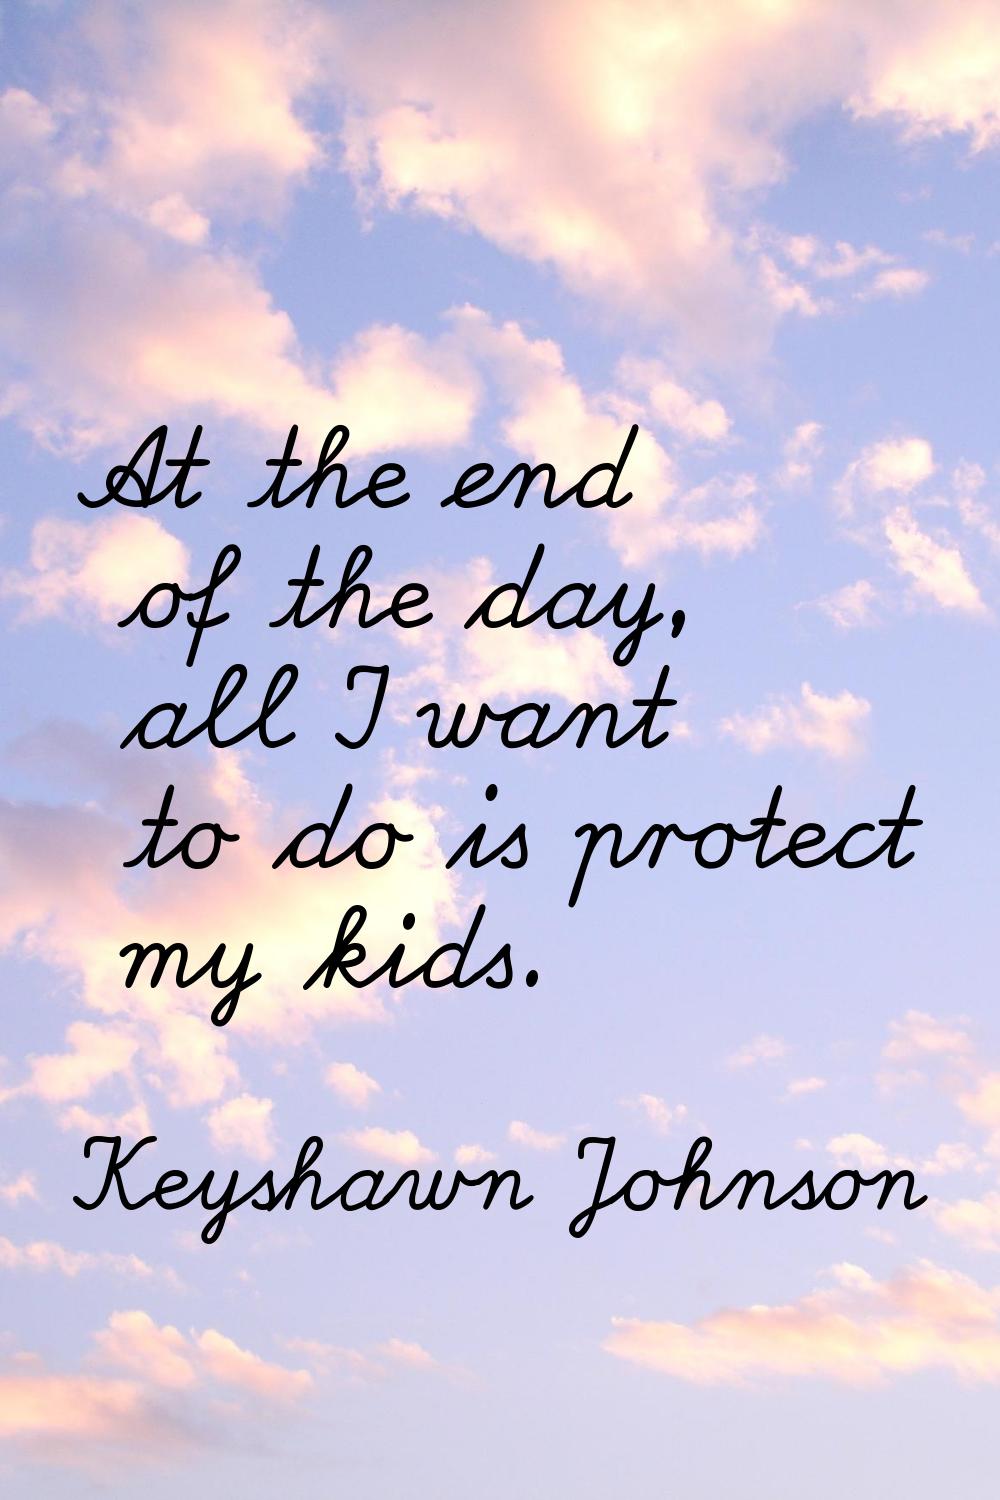 At the end of the day, all I want to do is protect my kids.